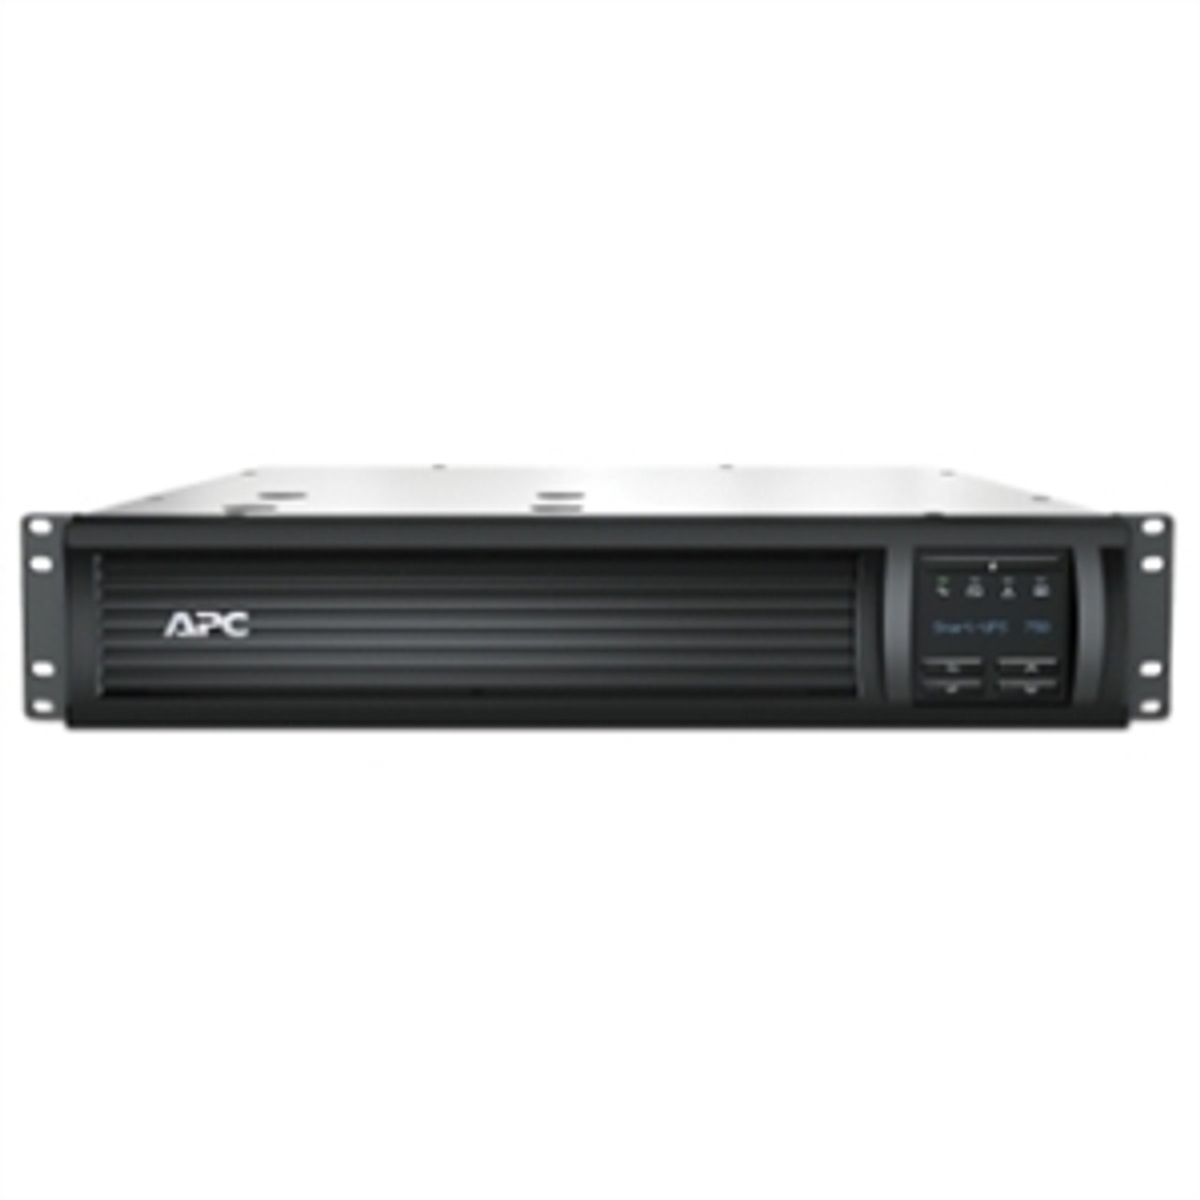 Picture of APC SMT750RM2UCNC Electric Smart-UPS Port 750VA Rack-Mountable with Network Card